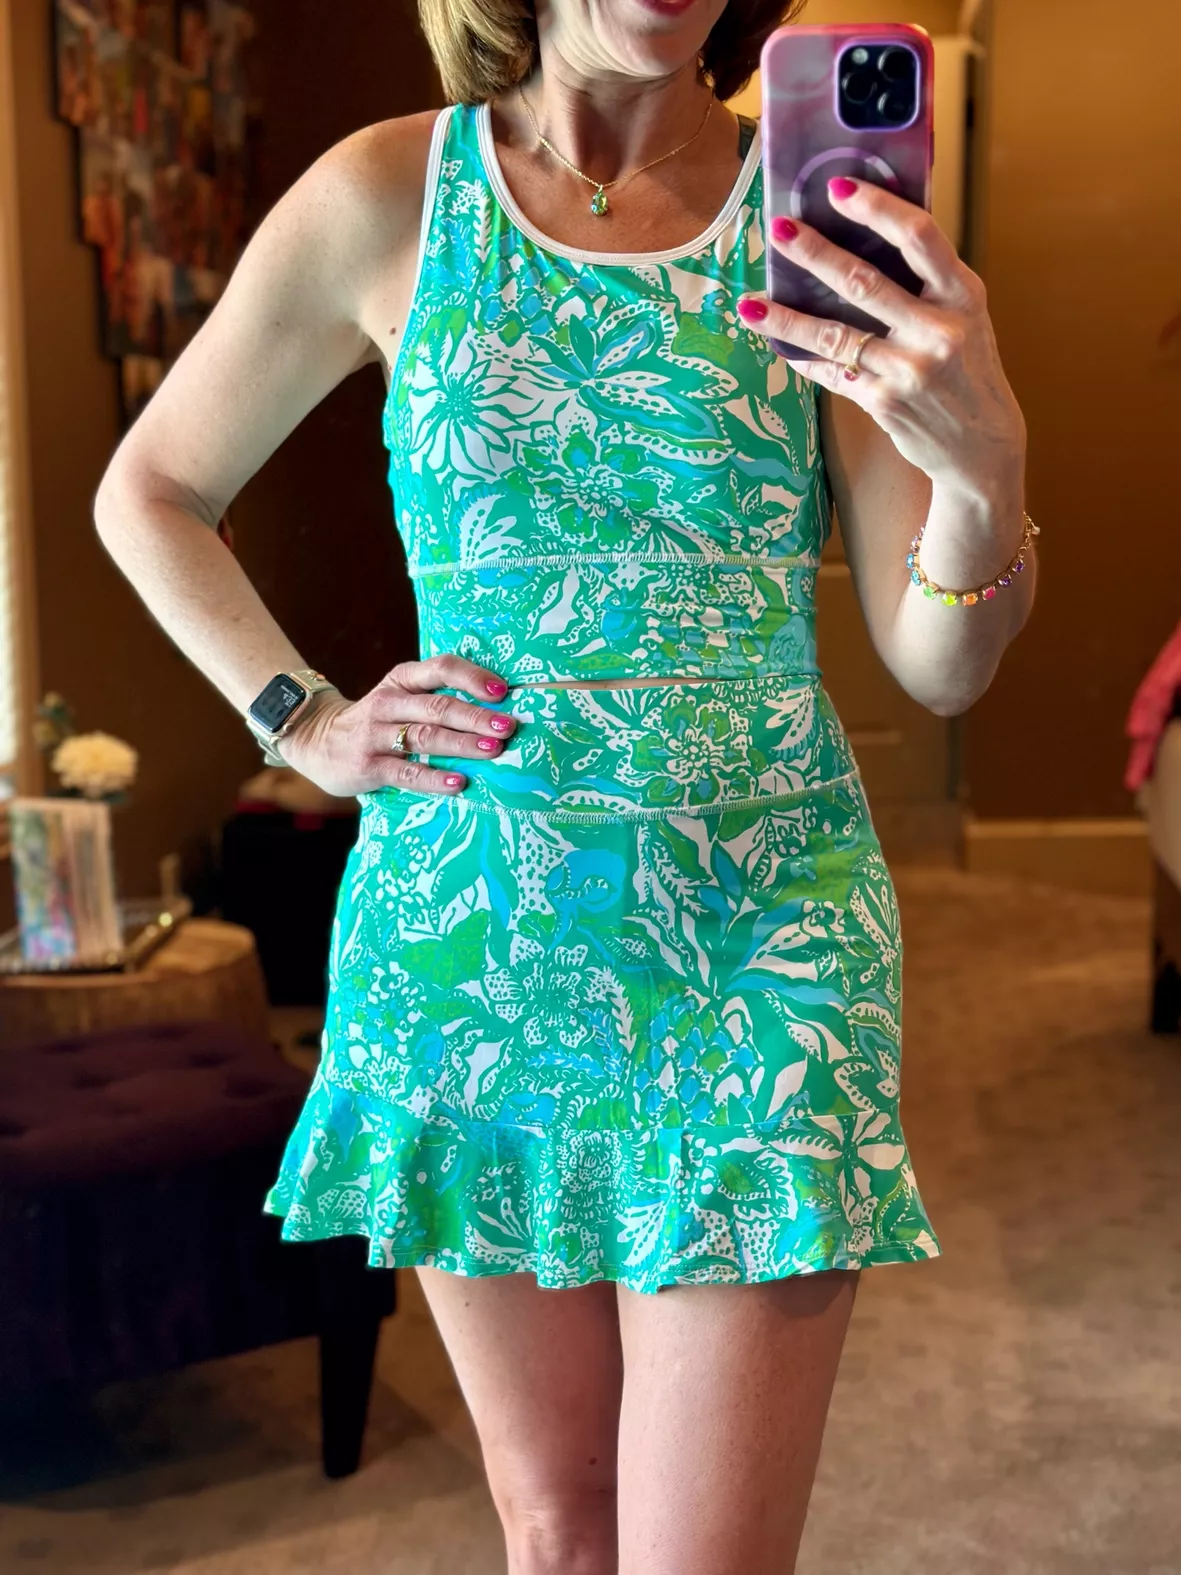 Lilly Pulitzer - Friday nights call for Lilly luxletic.